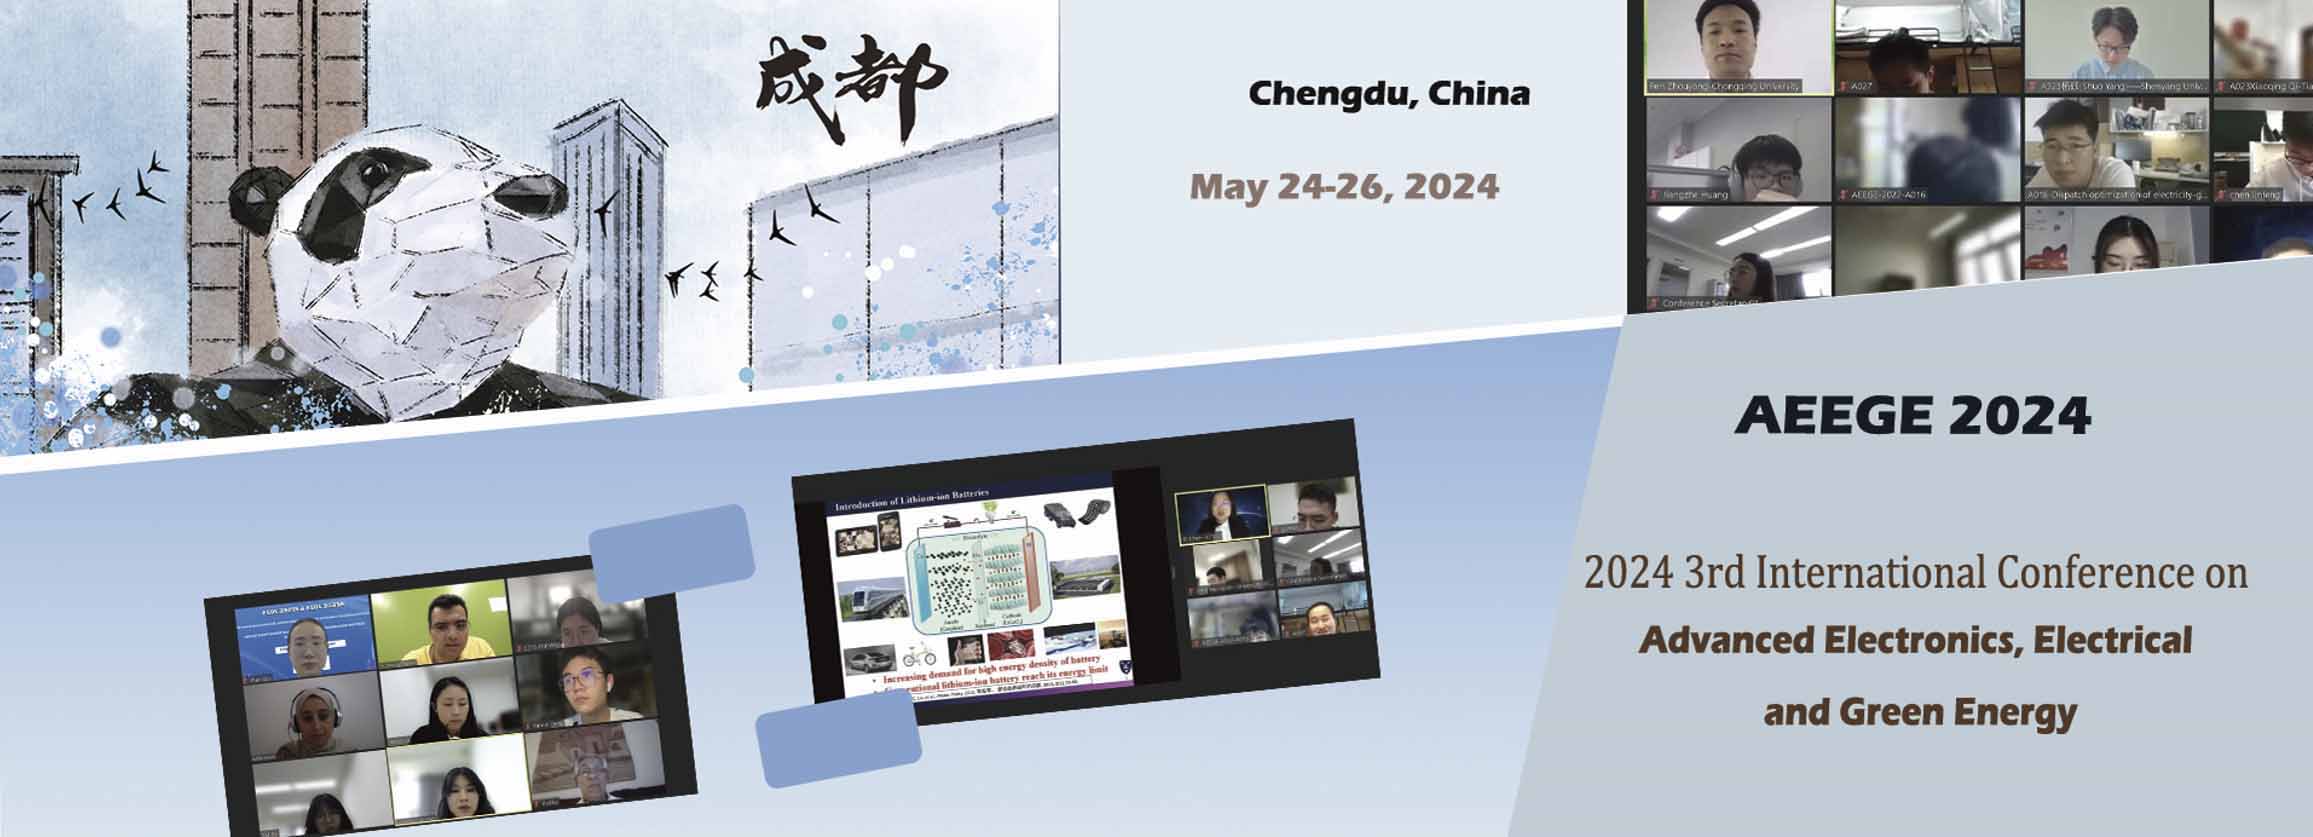 2024 3rd International Conference on Advanced Electronics, Electrical and Green Energy (AEEGE 2024), Chengdu, Sichuan, China